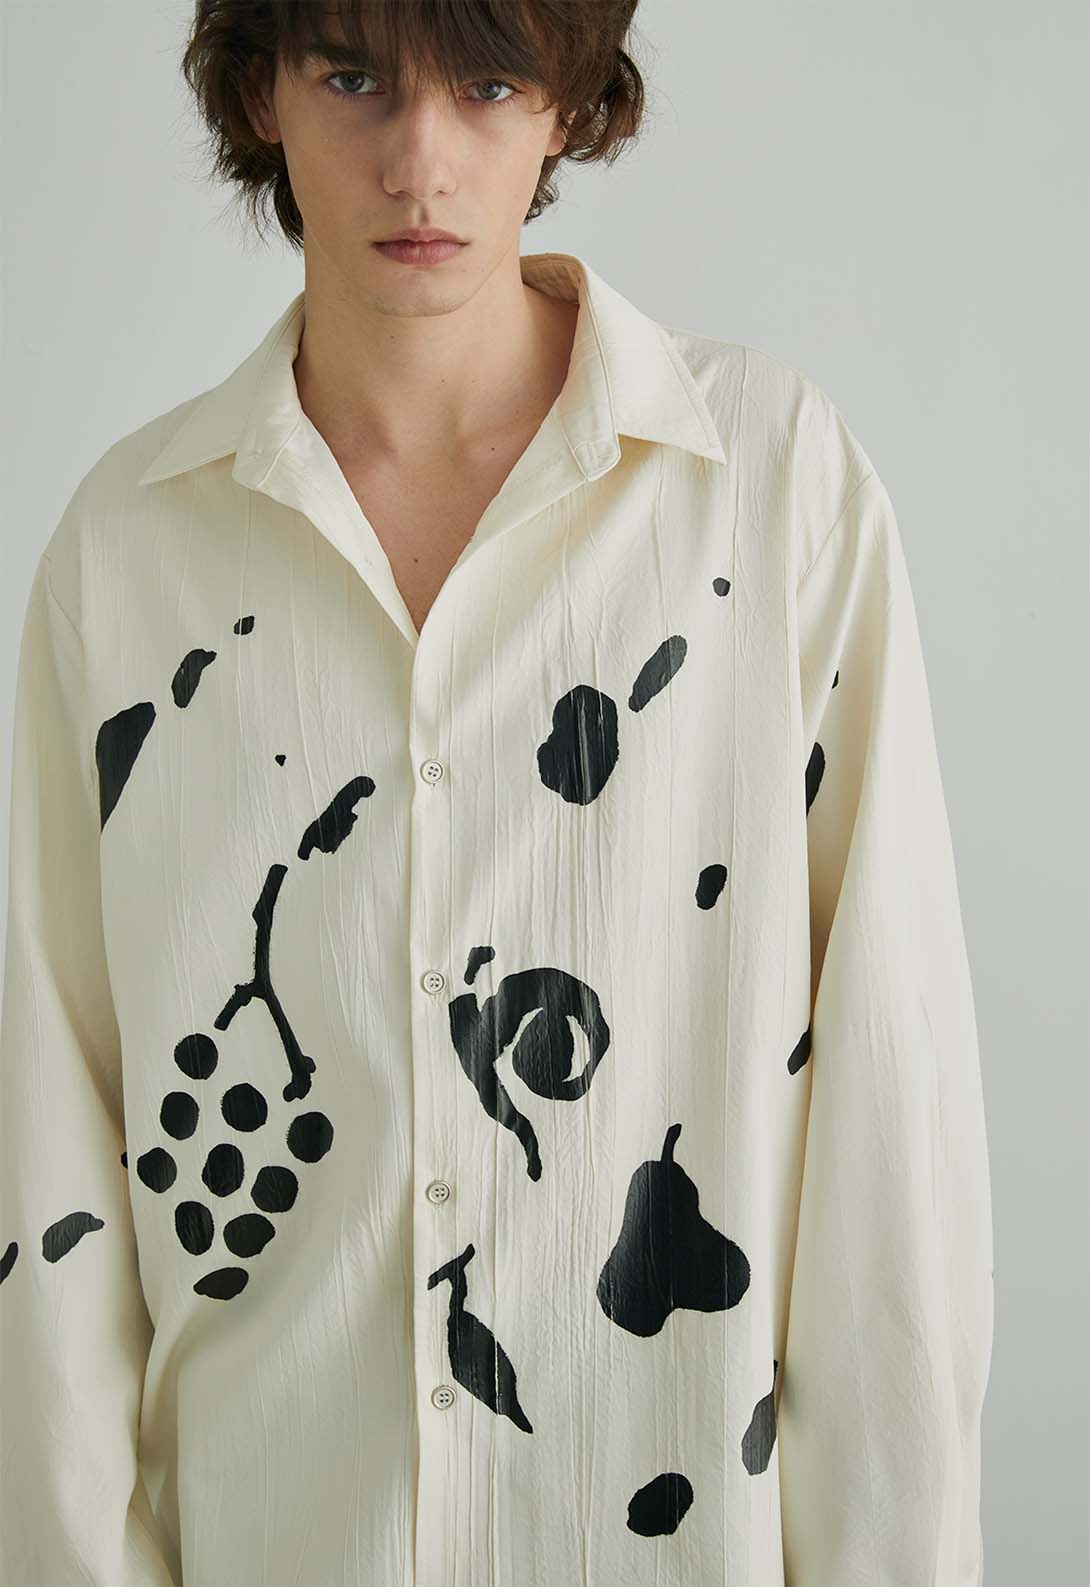 Screen printed pleated textured long sleeve shirt